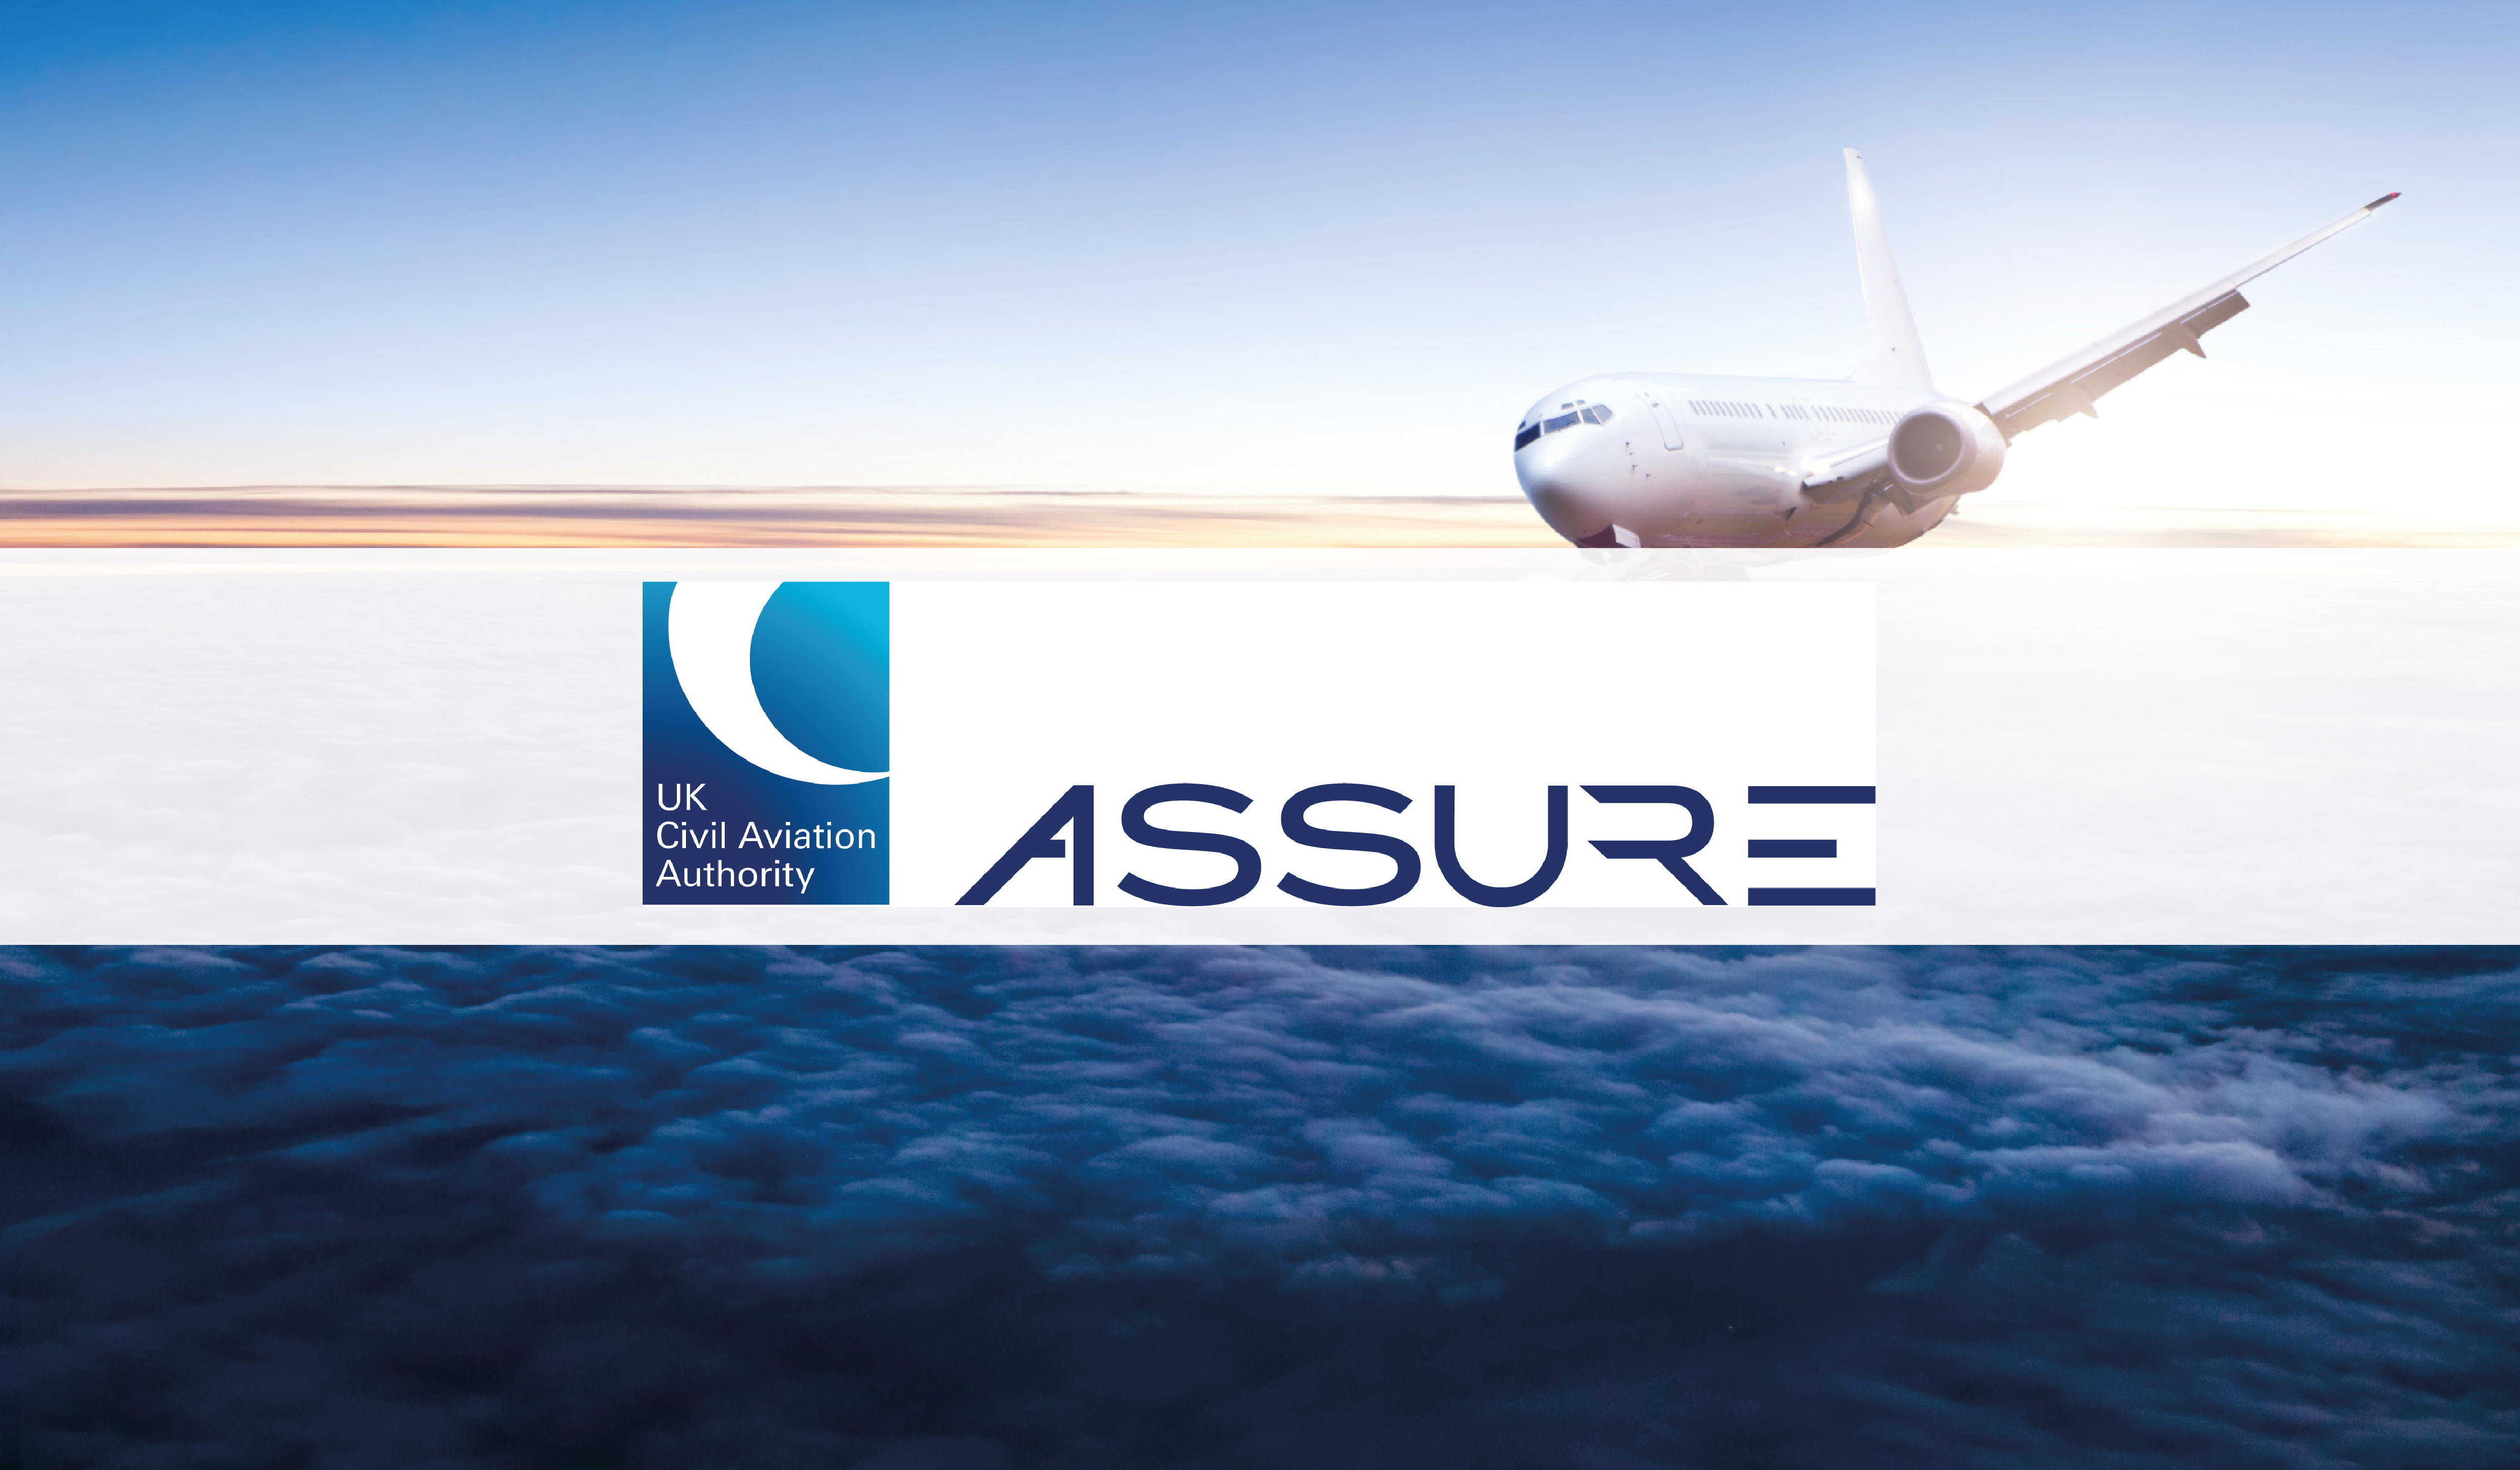 IASME to partner with the Civil Aviation Authority to deliver the CAA ASSURE SCHEME